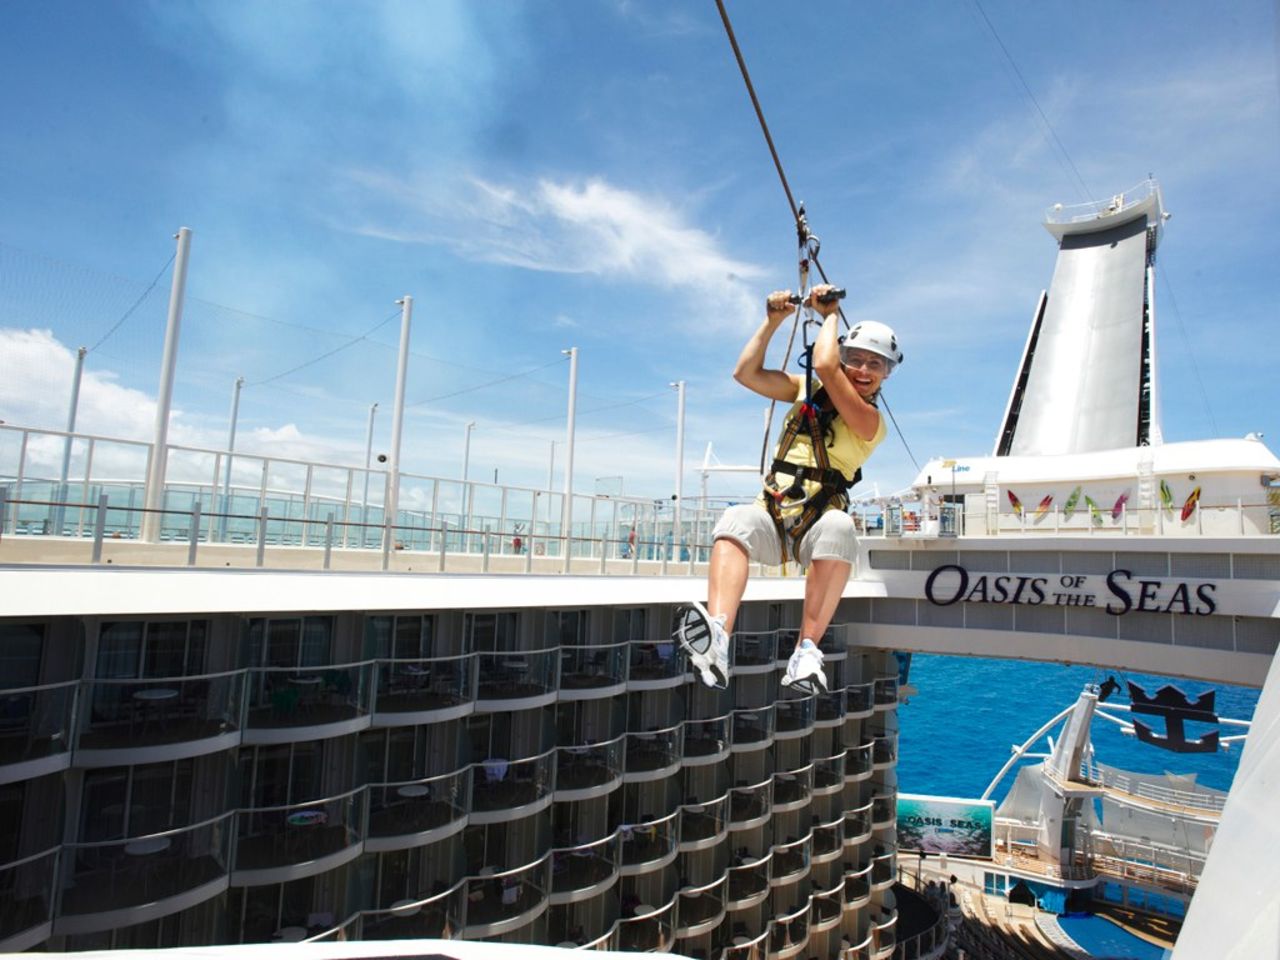 The <em>Oasis of the Seas</em> has 25 restaurants, 2,394 crew members and seven themed "neighborhoods." Its zip line is suspended nine decks high and runs 82 feet across the ship's open-air atrium. 